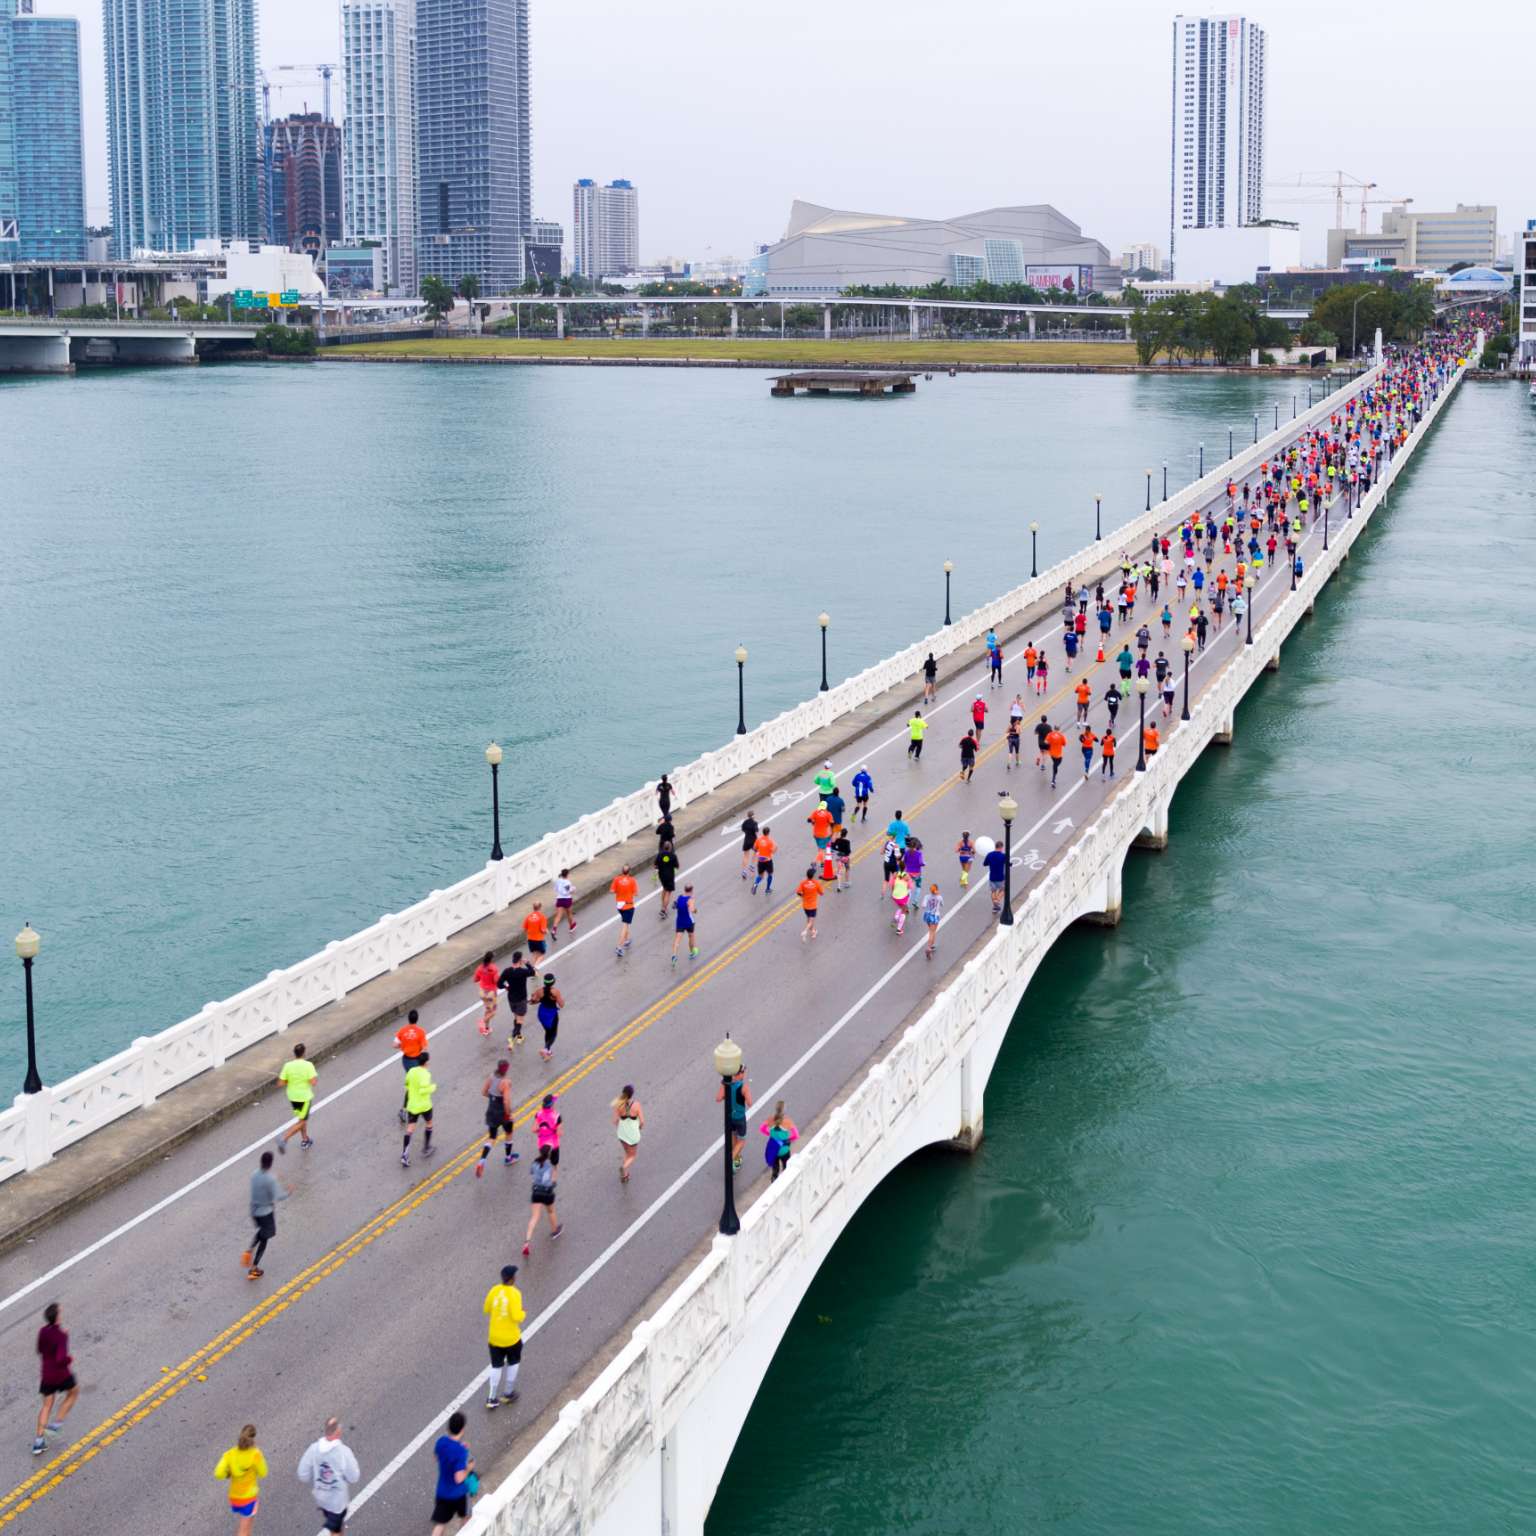 A crowd of runners running across a bridge over water with city buildings in the background